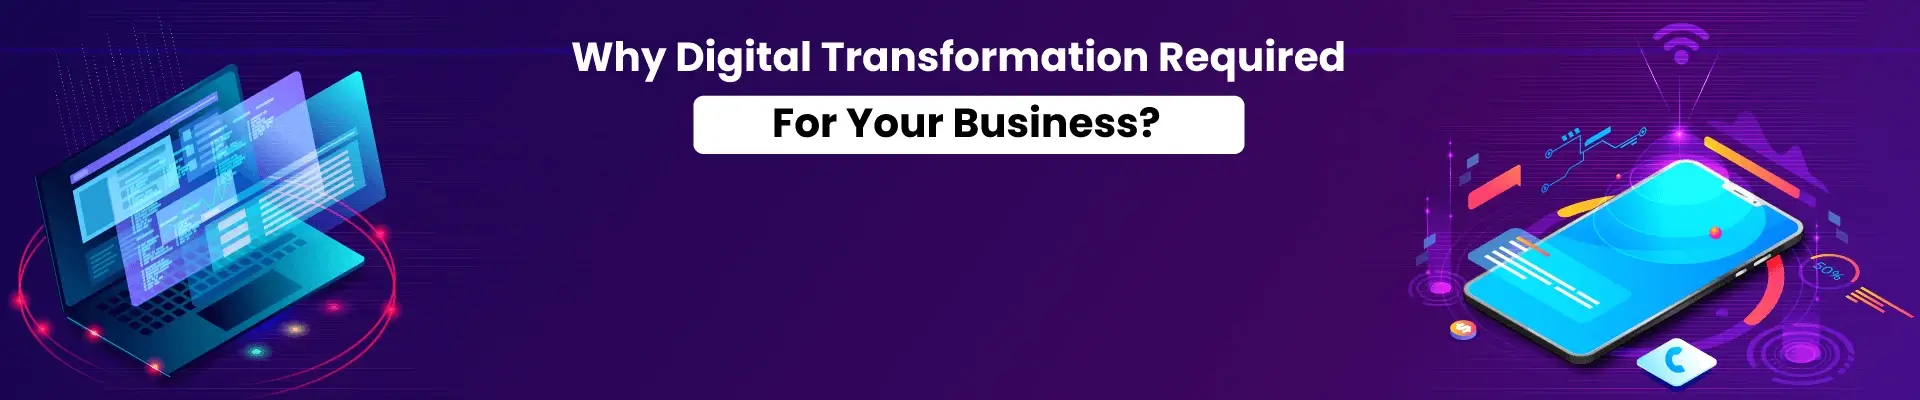 Why Digital Transformation Required For Your Business